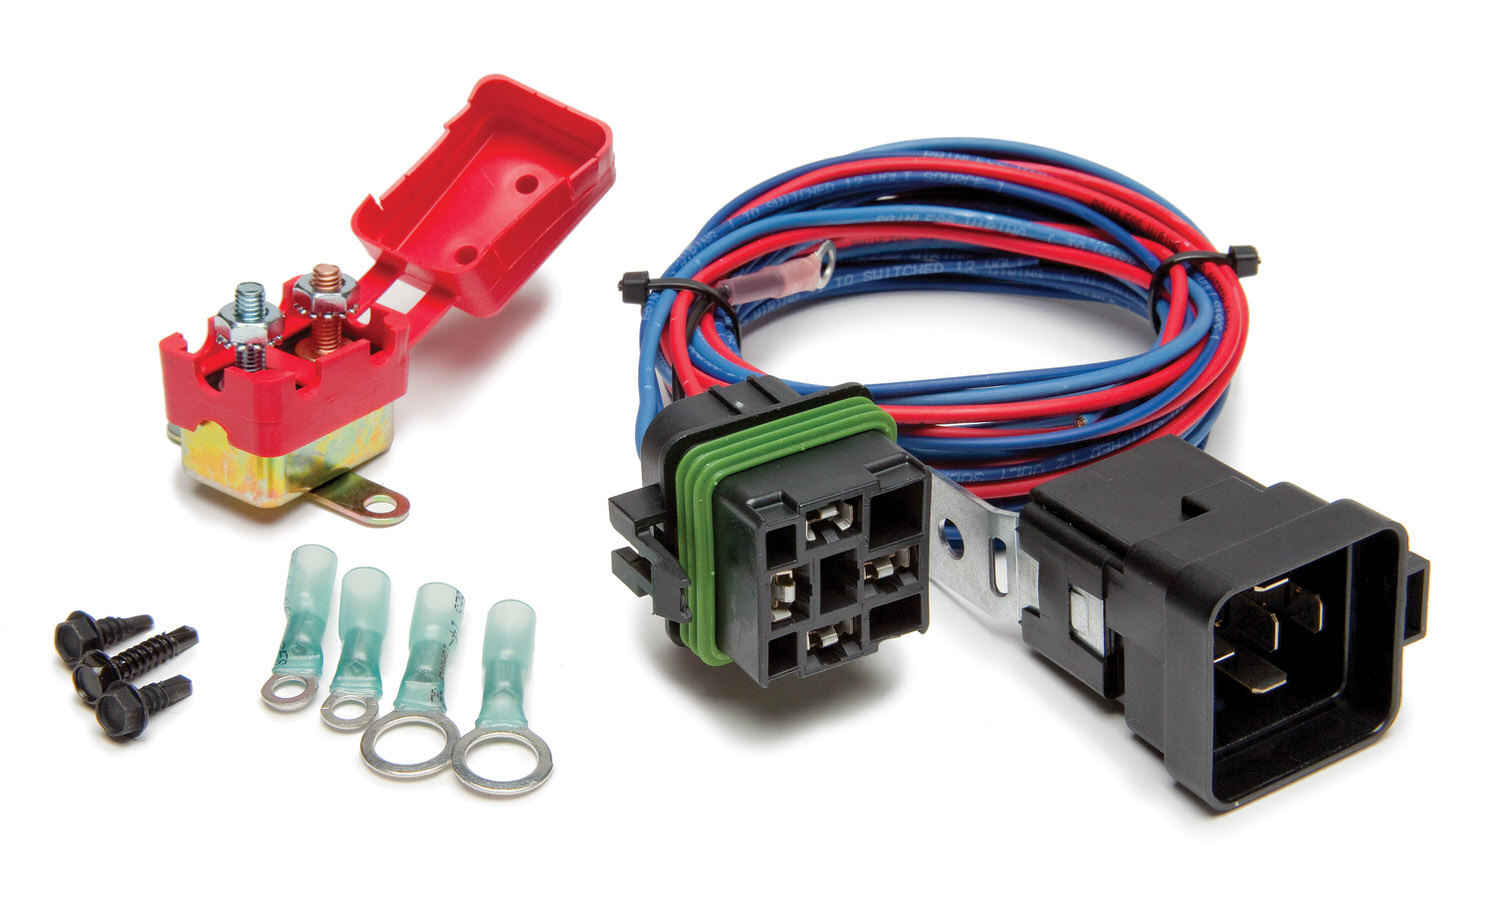 Painless Wiring 30132 Relay Switch, Weatherproof, Single Pole, 20 amp, 12V, Wiring Pigtail Included, Electric Water Pump, Kit